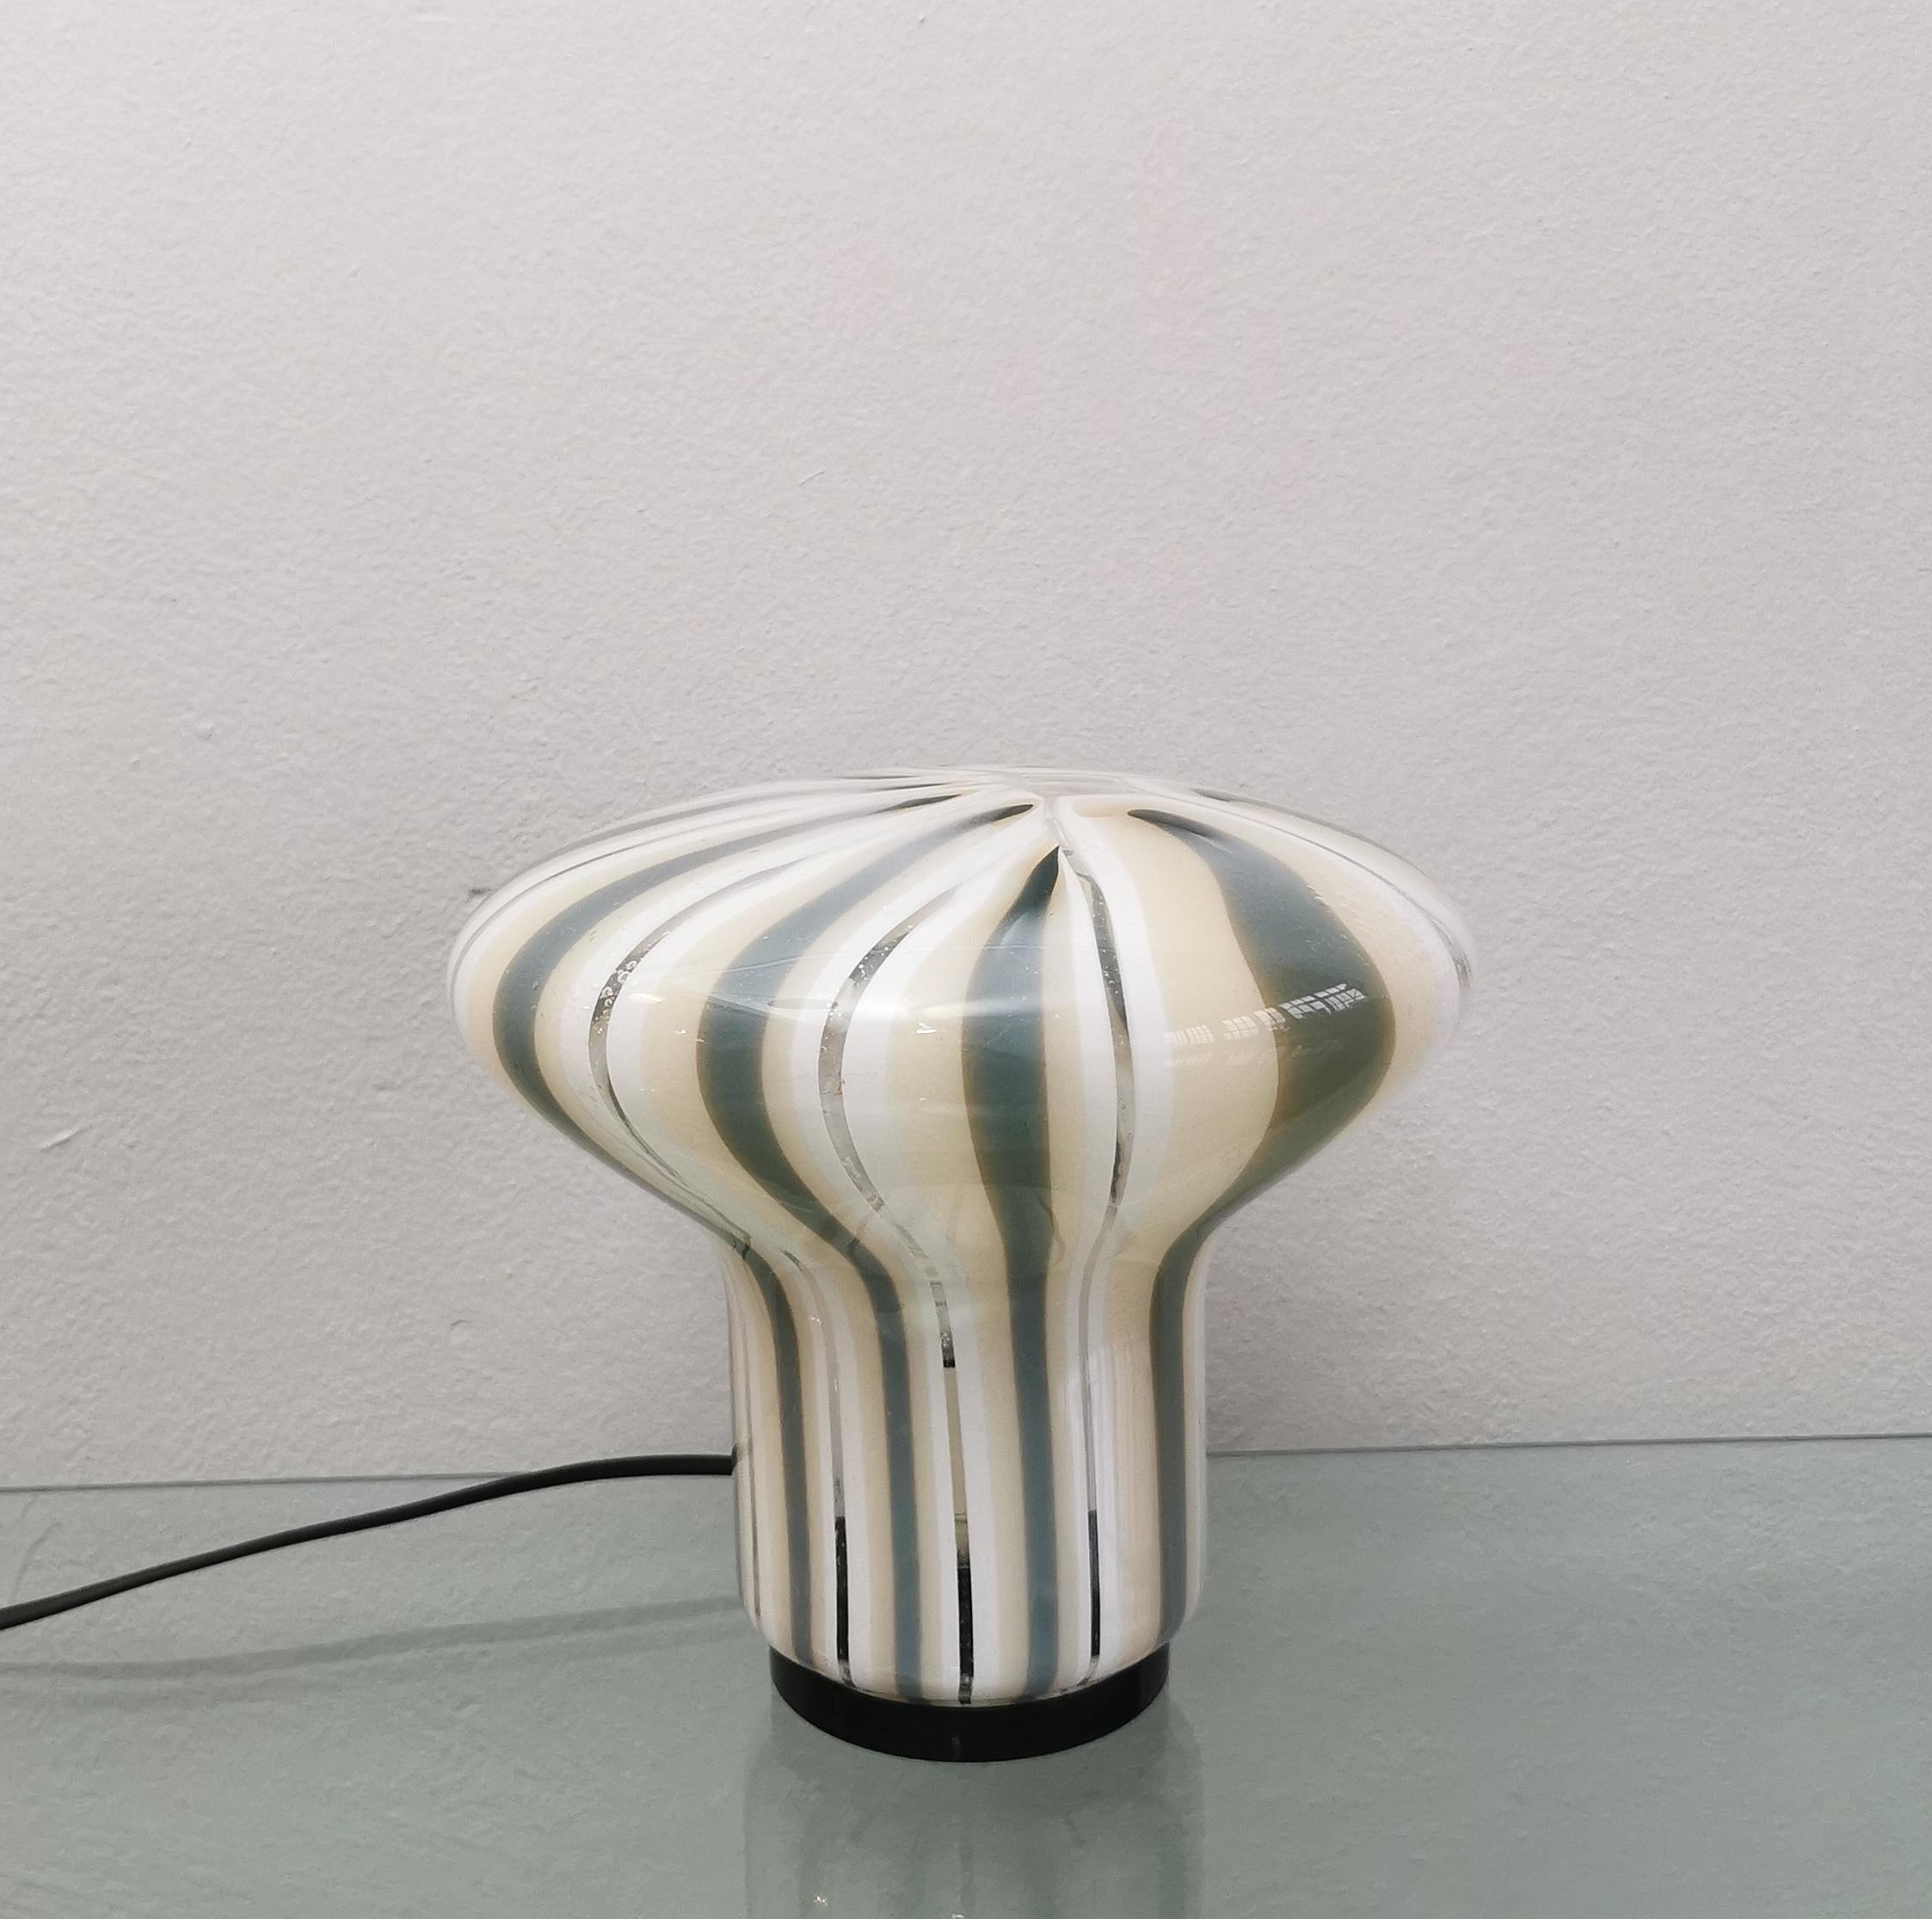 Particular table lamp with 1 light E27 produced in Italy in the 70s. The lamp has a nice shape, almost to represent a Murano glass mushroom with stripes in shades of gray, cream, white and transparent.